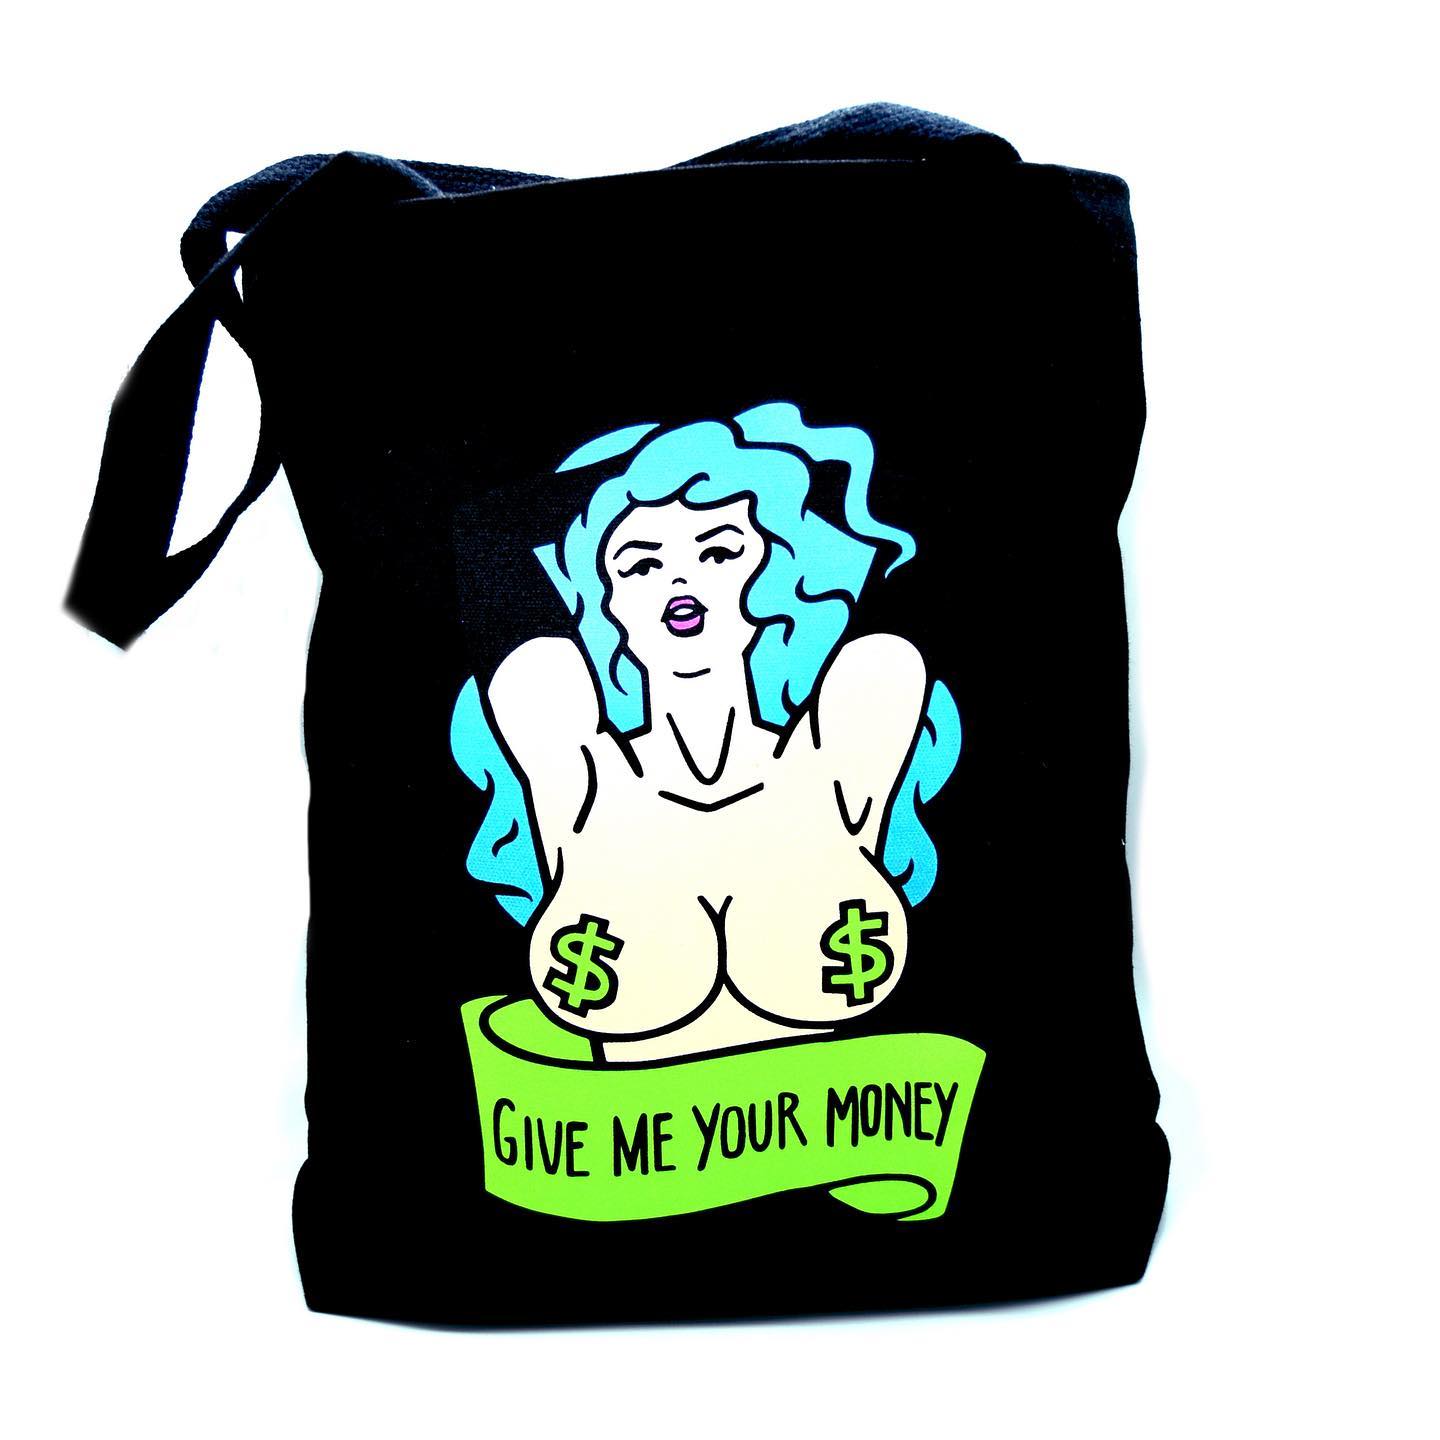 A black canvas tote bag, featuring the bust of a topless, blue haired woman wearing green dollar sign pasties. Below her is a banner that says "GIVE ME YOUR MONEY".